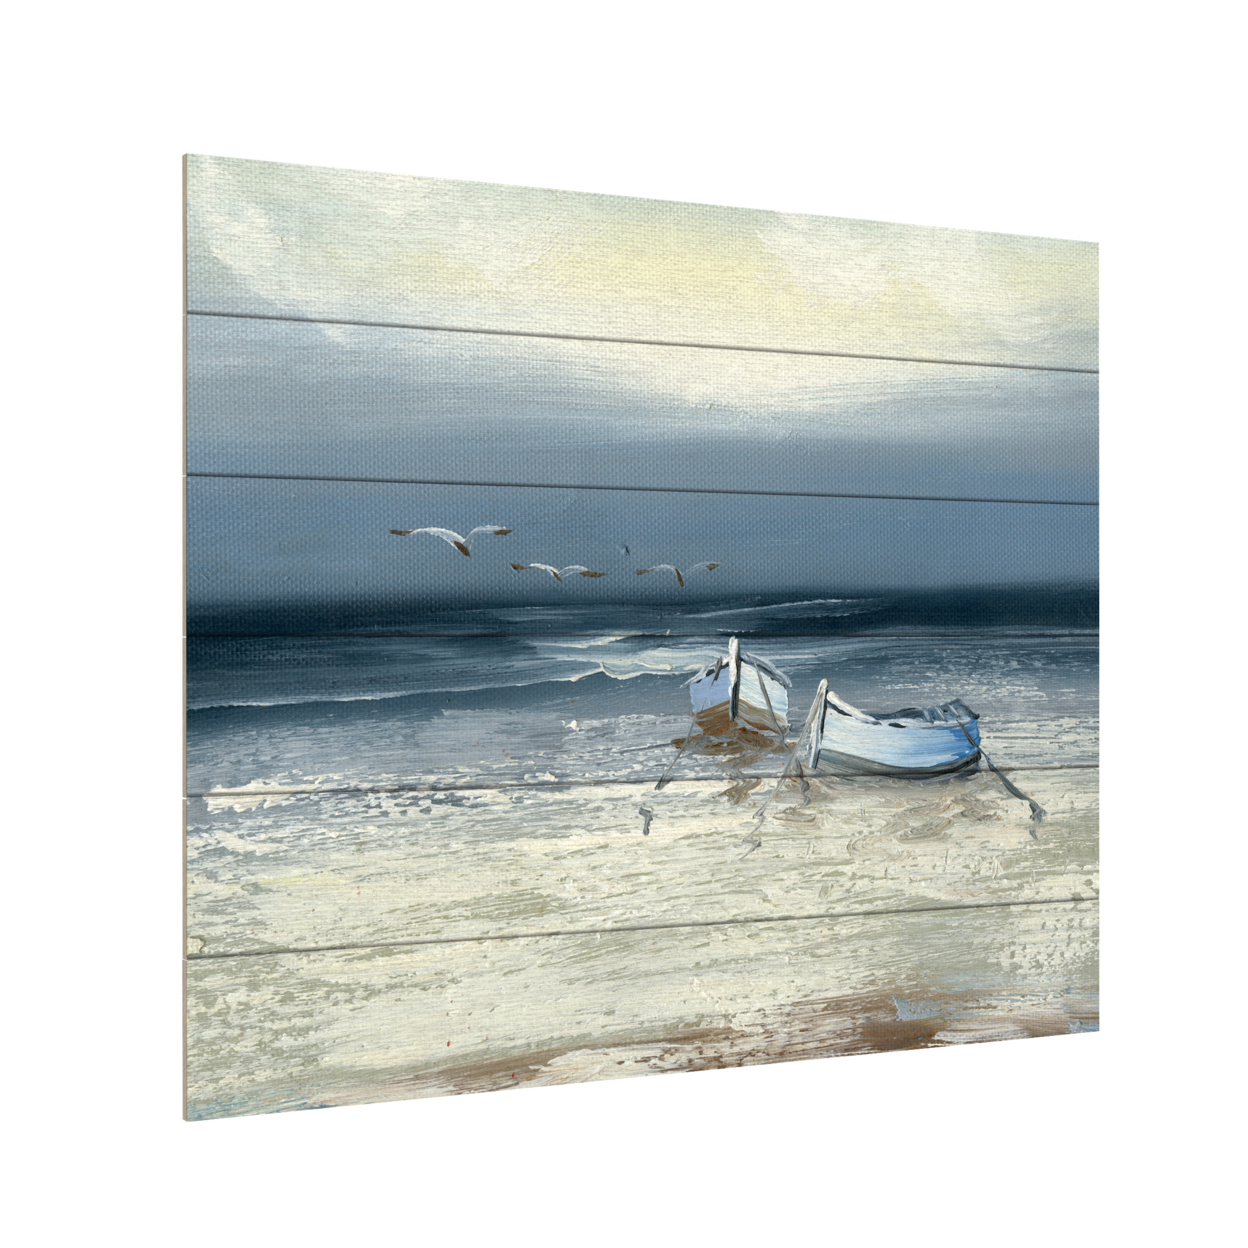 Wooden Slat Art 18 X 22 Inches Titled Low Tide Ready To Hang Home Decor Picture